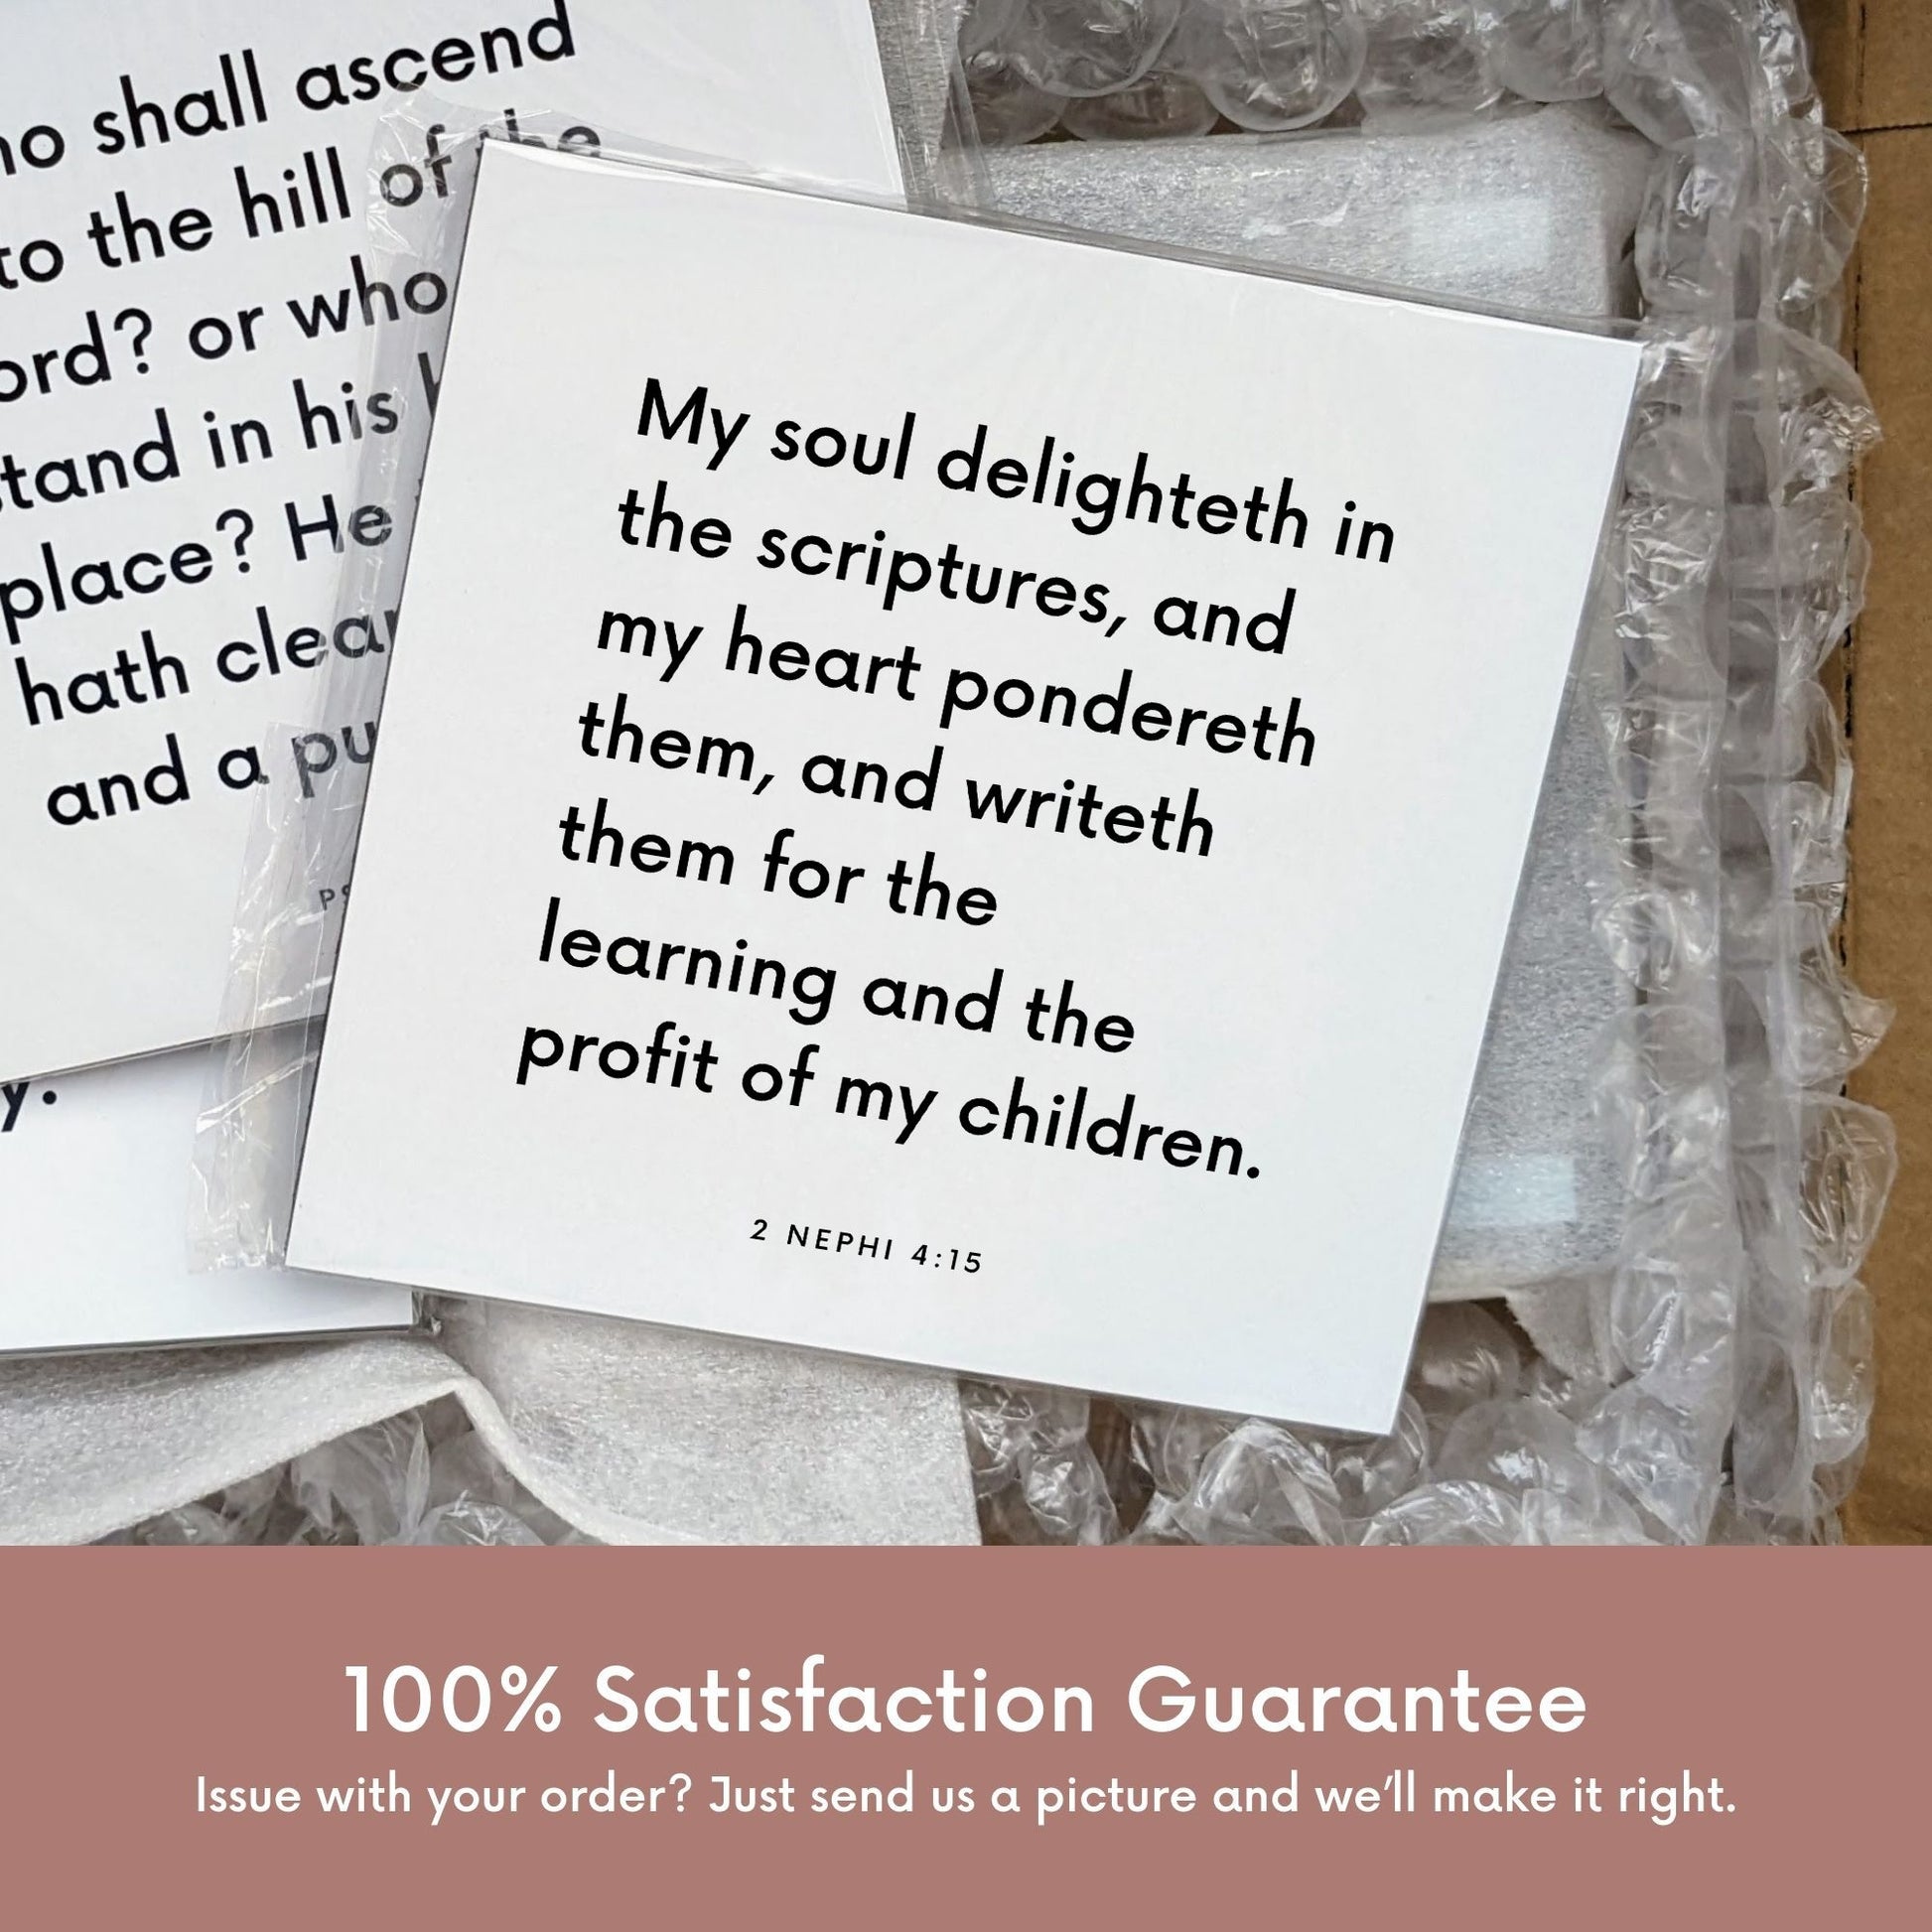 Shipping materials for scripture tile of 2 Nephi 4:15 - "My soul delighteth in the scriptures"